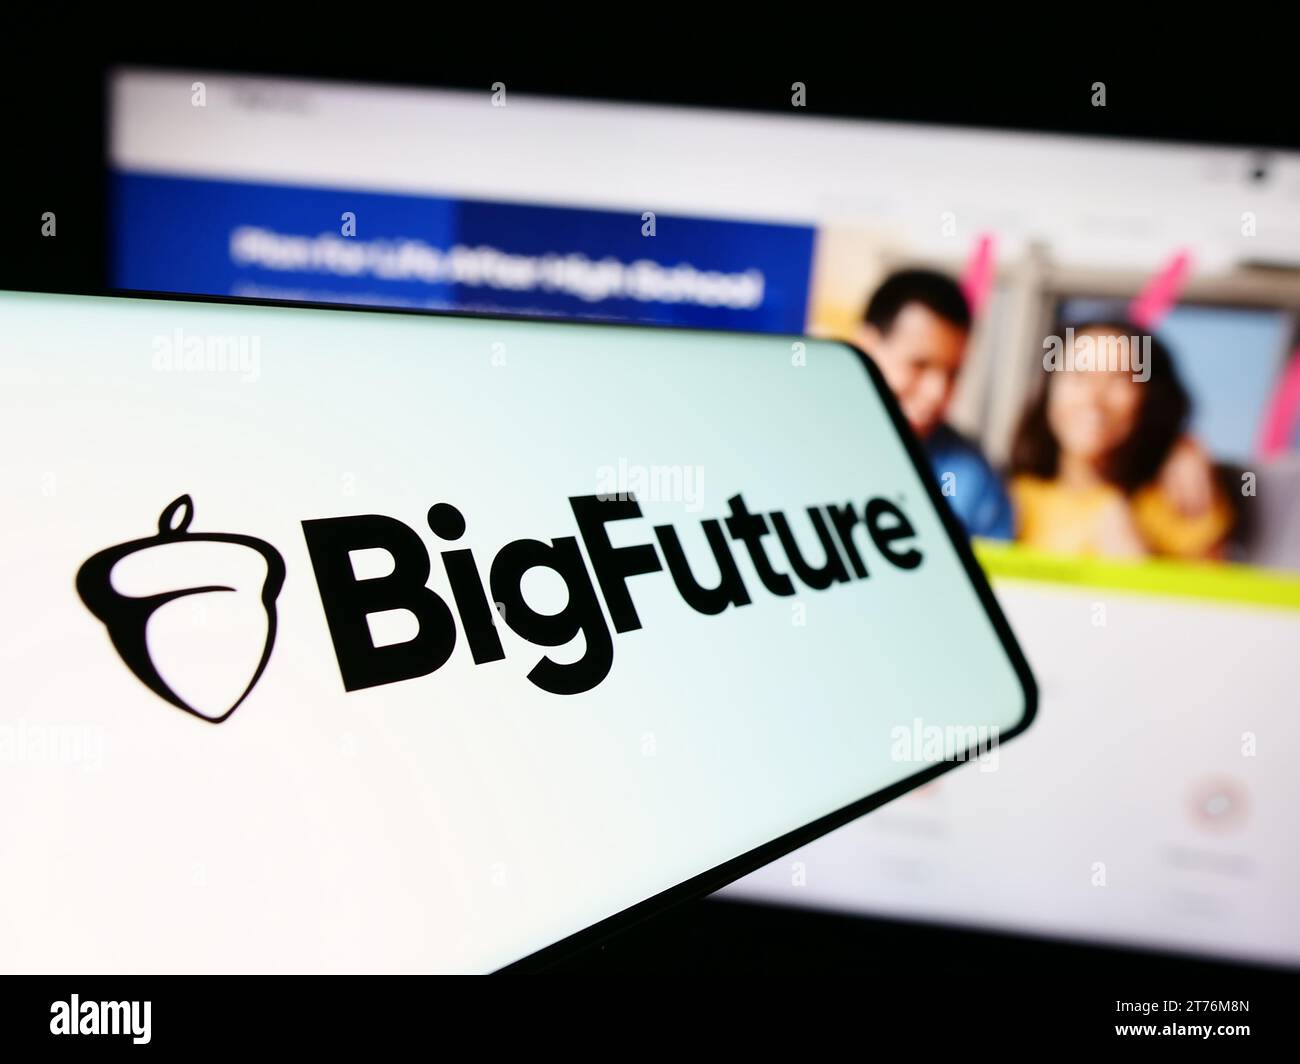 Mobile phone with logo of American educational online planning guide BigFuture in front of website. Focus on center-left of phone display. Stock Photo